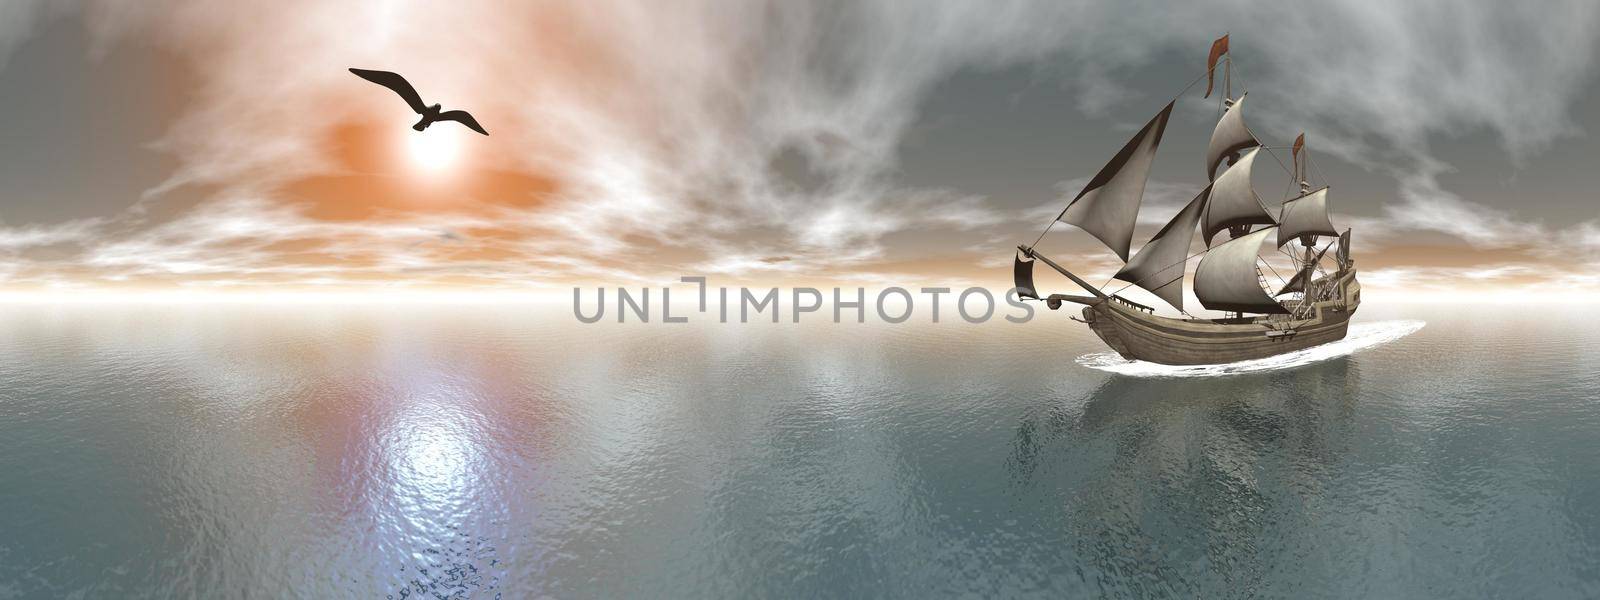 Pirate ship floating on the ocean next to seagull flying by sunset, 360 degrees effect